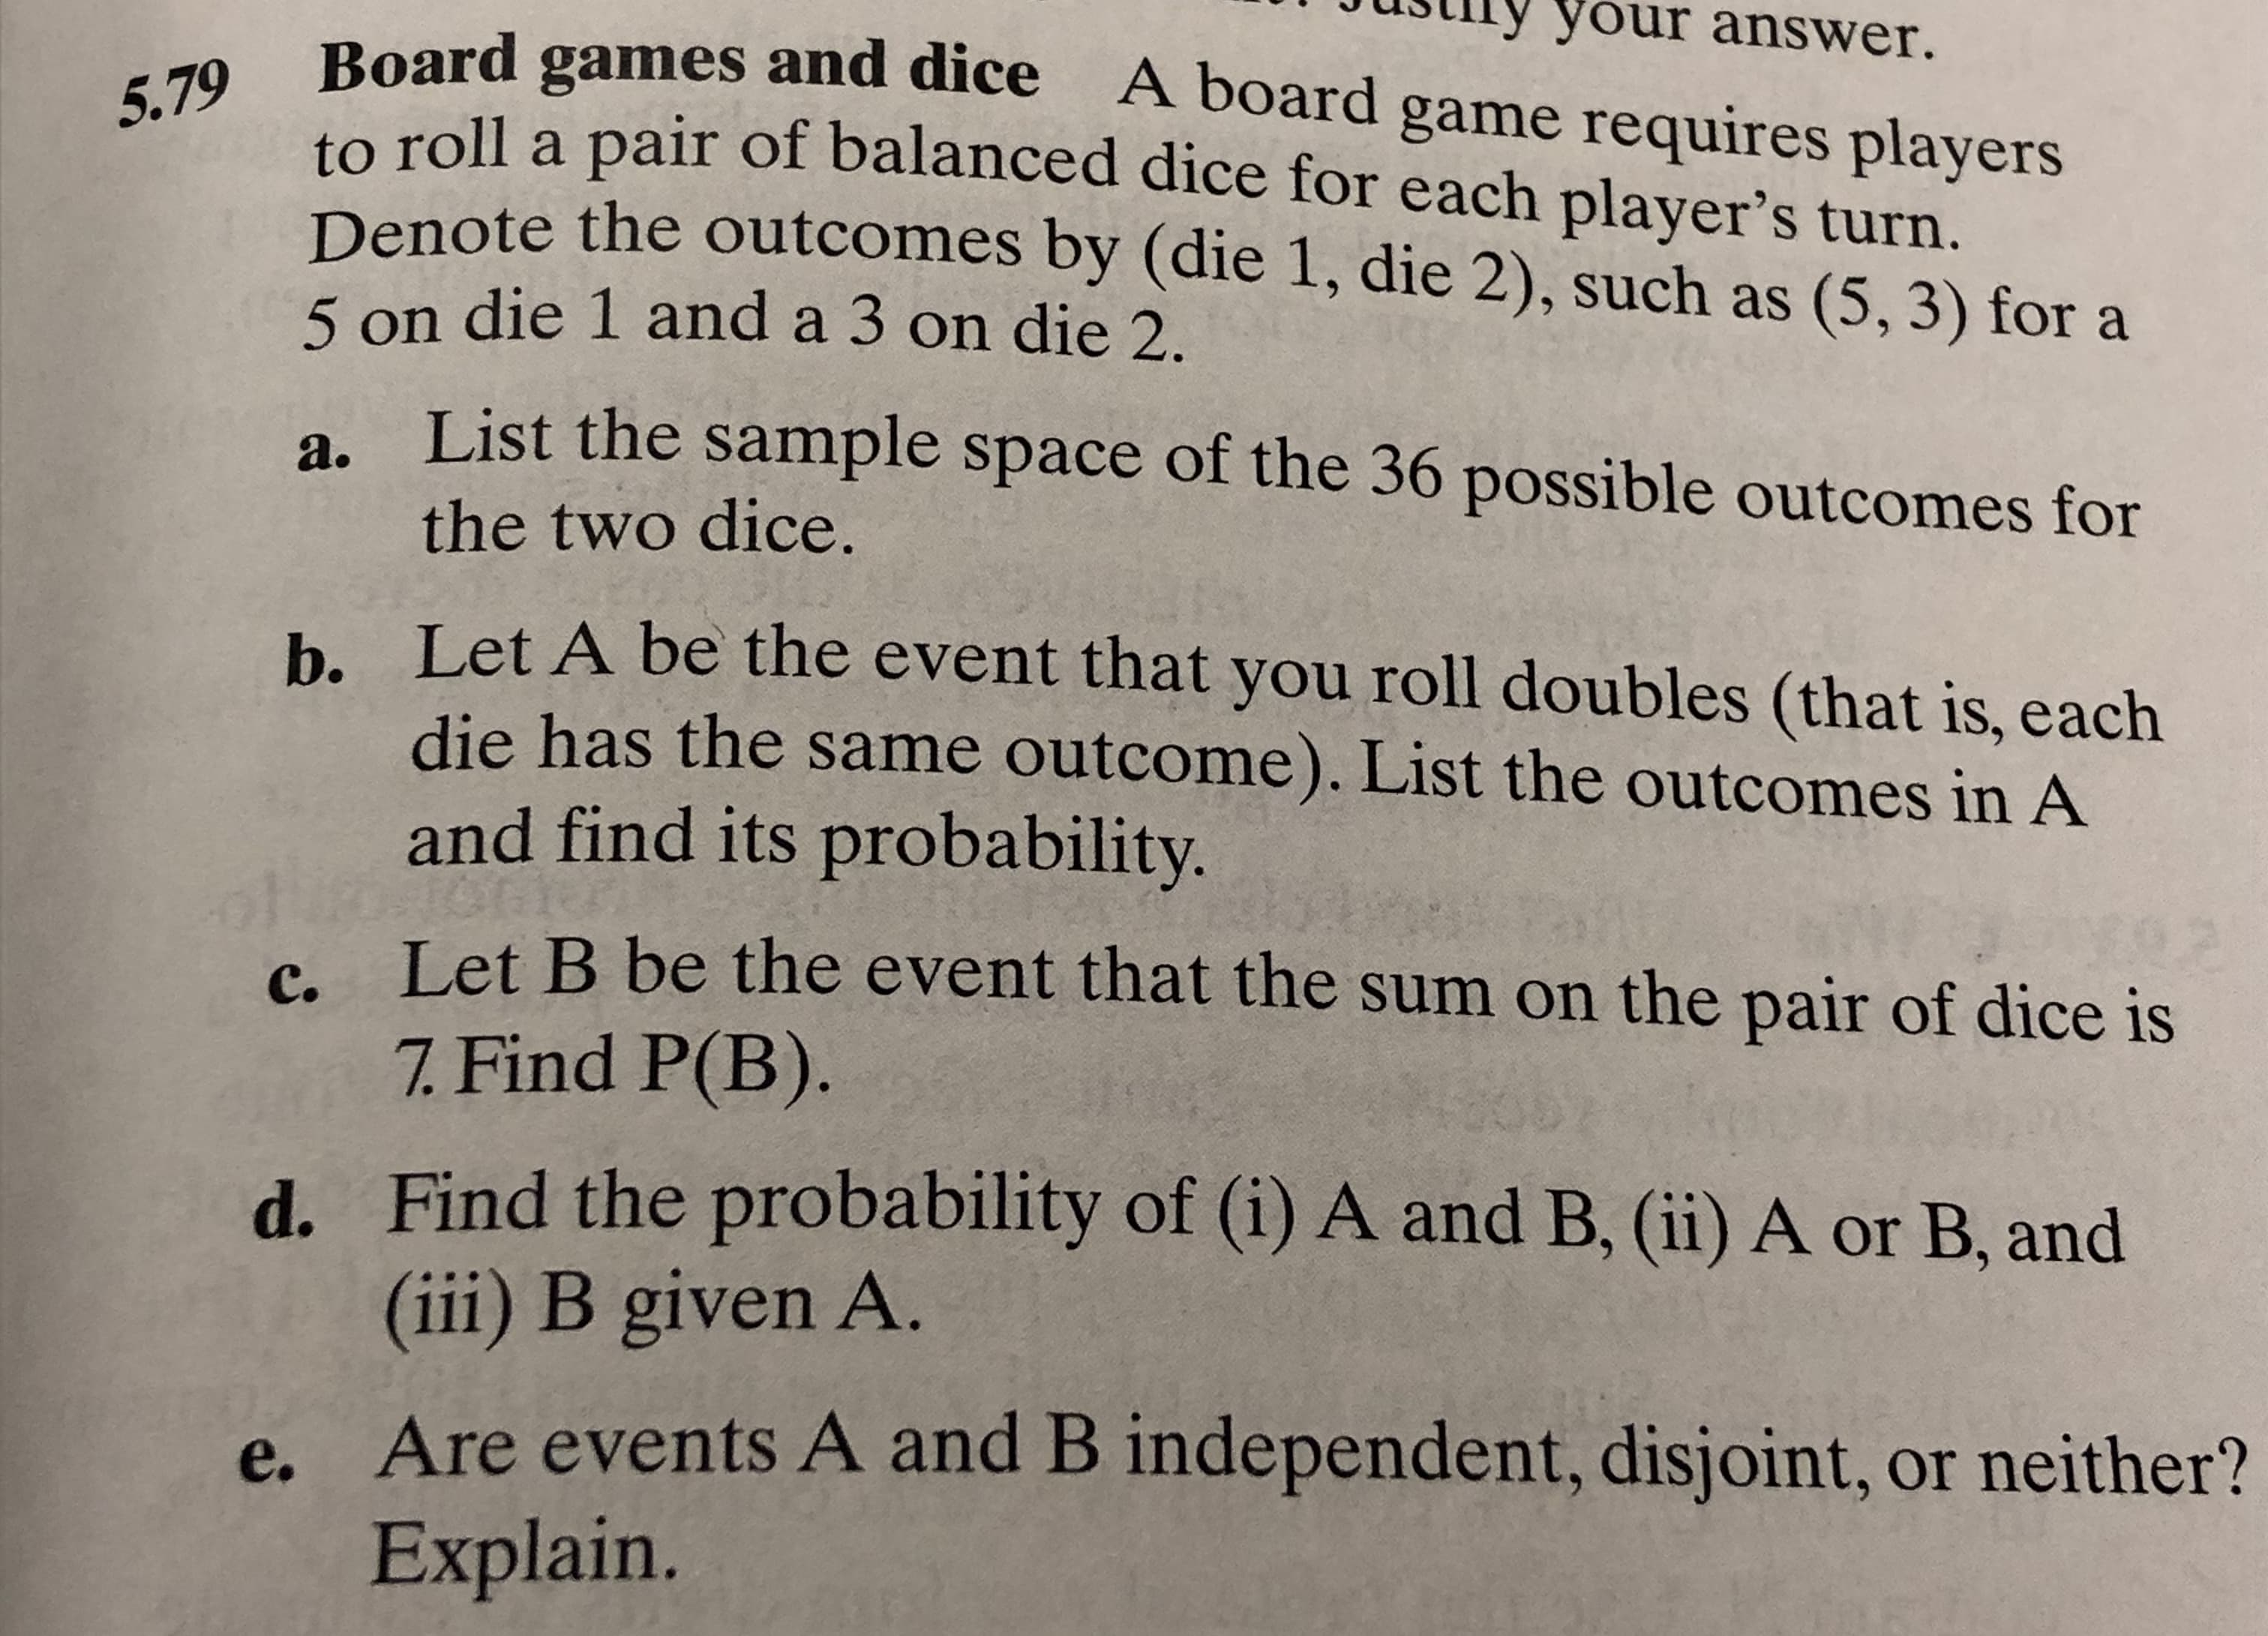 your answer.
Board games and dice A board game requires players
to roll a pair of balanced dice for each player's turn.
Denote the outcomes by (die 1, die 2), such as (5, 3) for a
5.79
5 on die 1 and a 3 on die 2
List the sample space of the 36 possible outcomes for
а.
the two dice.
b. Let A be the event that you roll doubles (that is, each
die has the same outcome). List the outcomes in A
and find its probability.
Let B be the event that the sum on the pair of dice is
7. Find P(B).
с.
Find the probability of (i) A and B, (ii) A or B, and
(iii) B given A.
d.
Are events A and B independent, disjoint, or neither?
Explain.
e.
